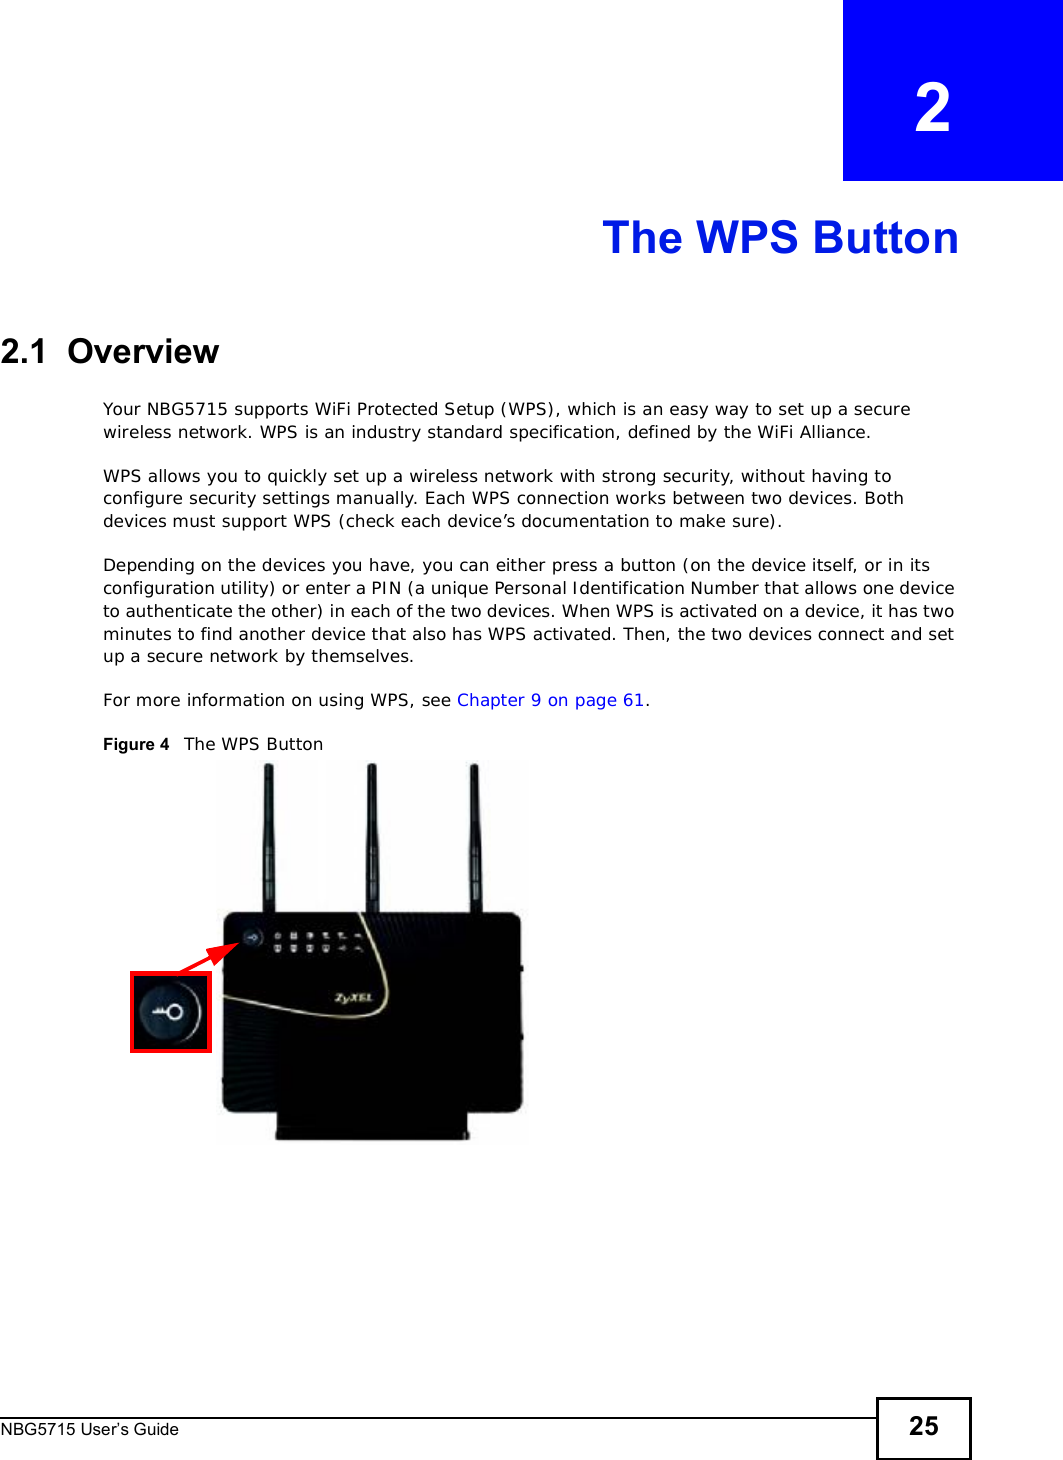 NBG5715 User’s Guide 25CHAPTER   2The WPS Button2.1  OverviewYour NBG5715 supports WiFi Protected Setup (WPS), which is an easy way to set up a secure wireless network. WPS is an industry standard specification, defined by the WiFi Alliance.WPS allows you to quickly set up a wireless network with strong security, without having to configure security settings manually. Each WPS connection works between two devices. Both devices must support WPS (check each device’s documentation to make sure). Depending on the devices you have, you can either press a button (on the device itself, or in its configuration utility) or enter a PIN (a unique Personal Identification Number that allows one device to authenticate the other) in each of the two devices. When WPS is activated on a device, it has two minutes to find another device that also has WPS activated. Then, the two devices connect and set up a secure network by themselves.For more information on using WPS, see Chapter 9 on page 61.Figure 4   The WPS Button